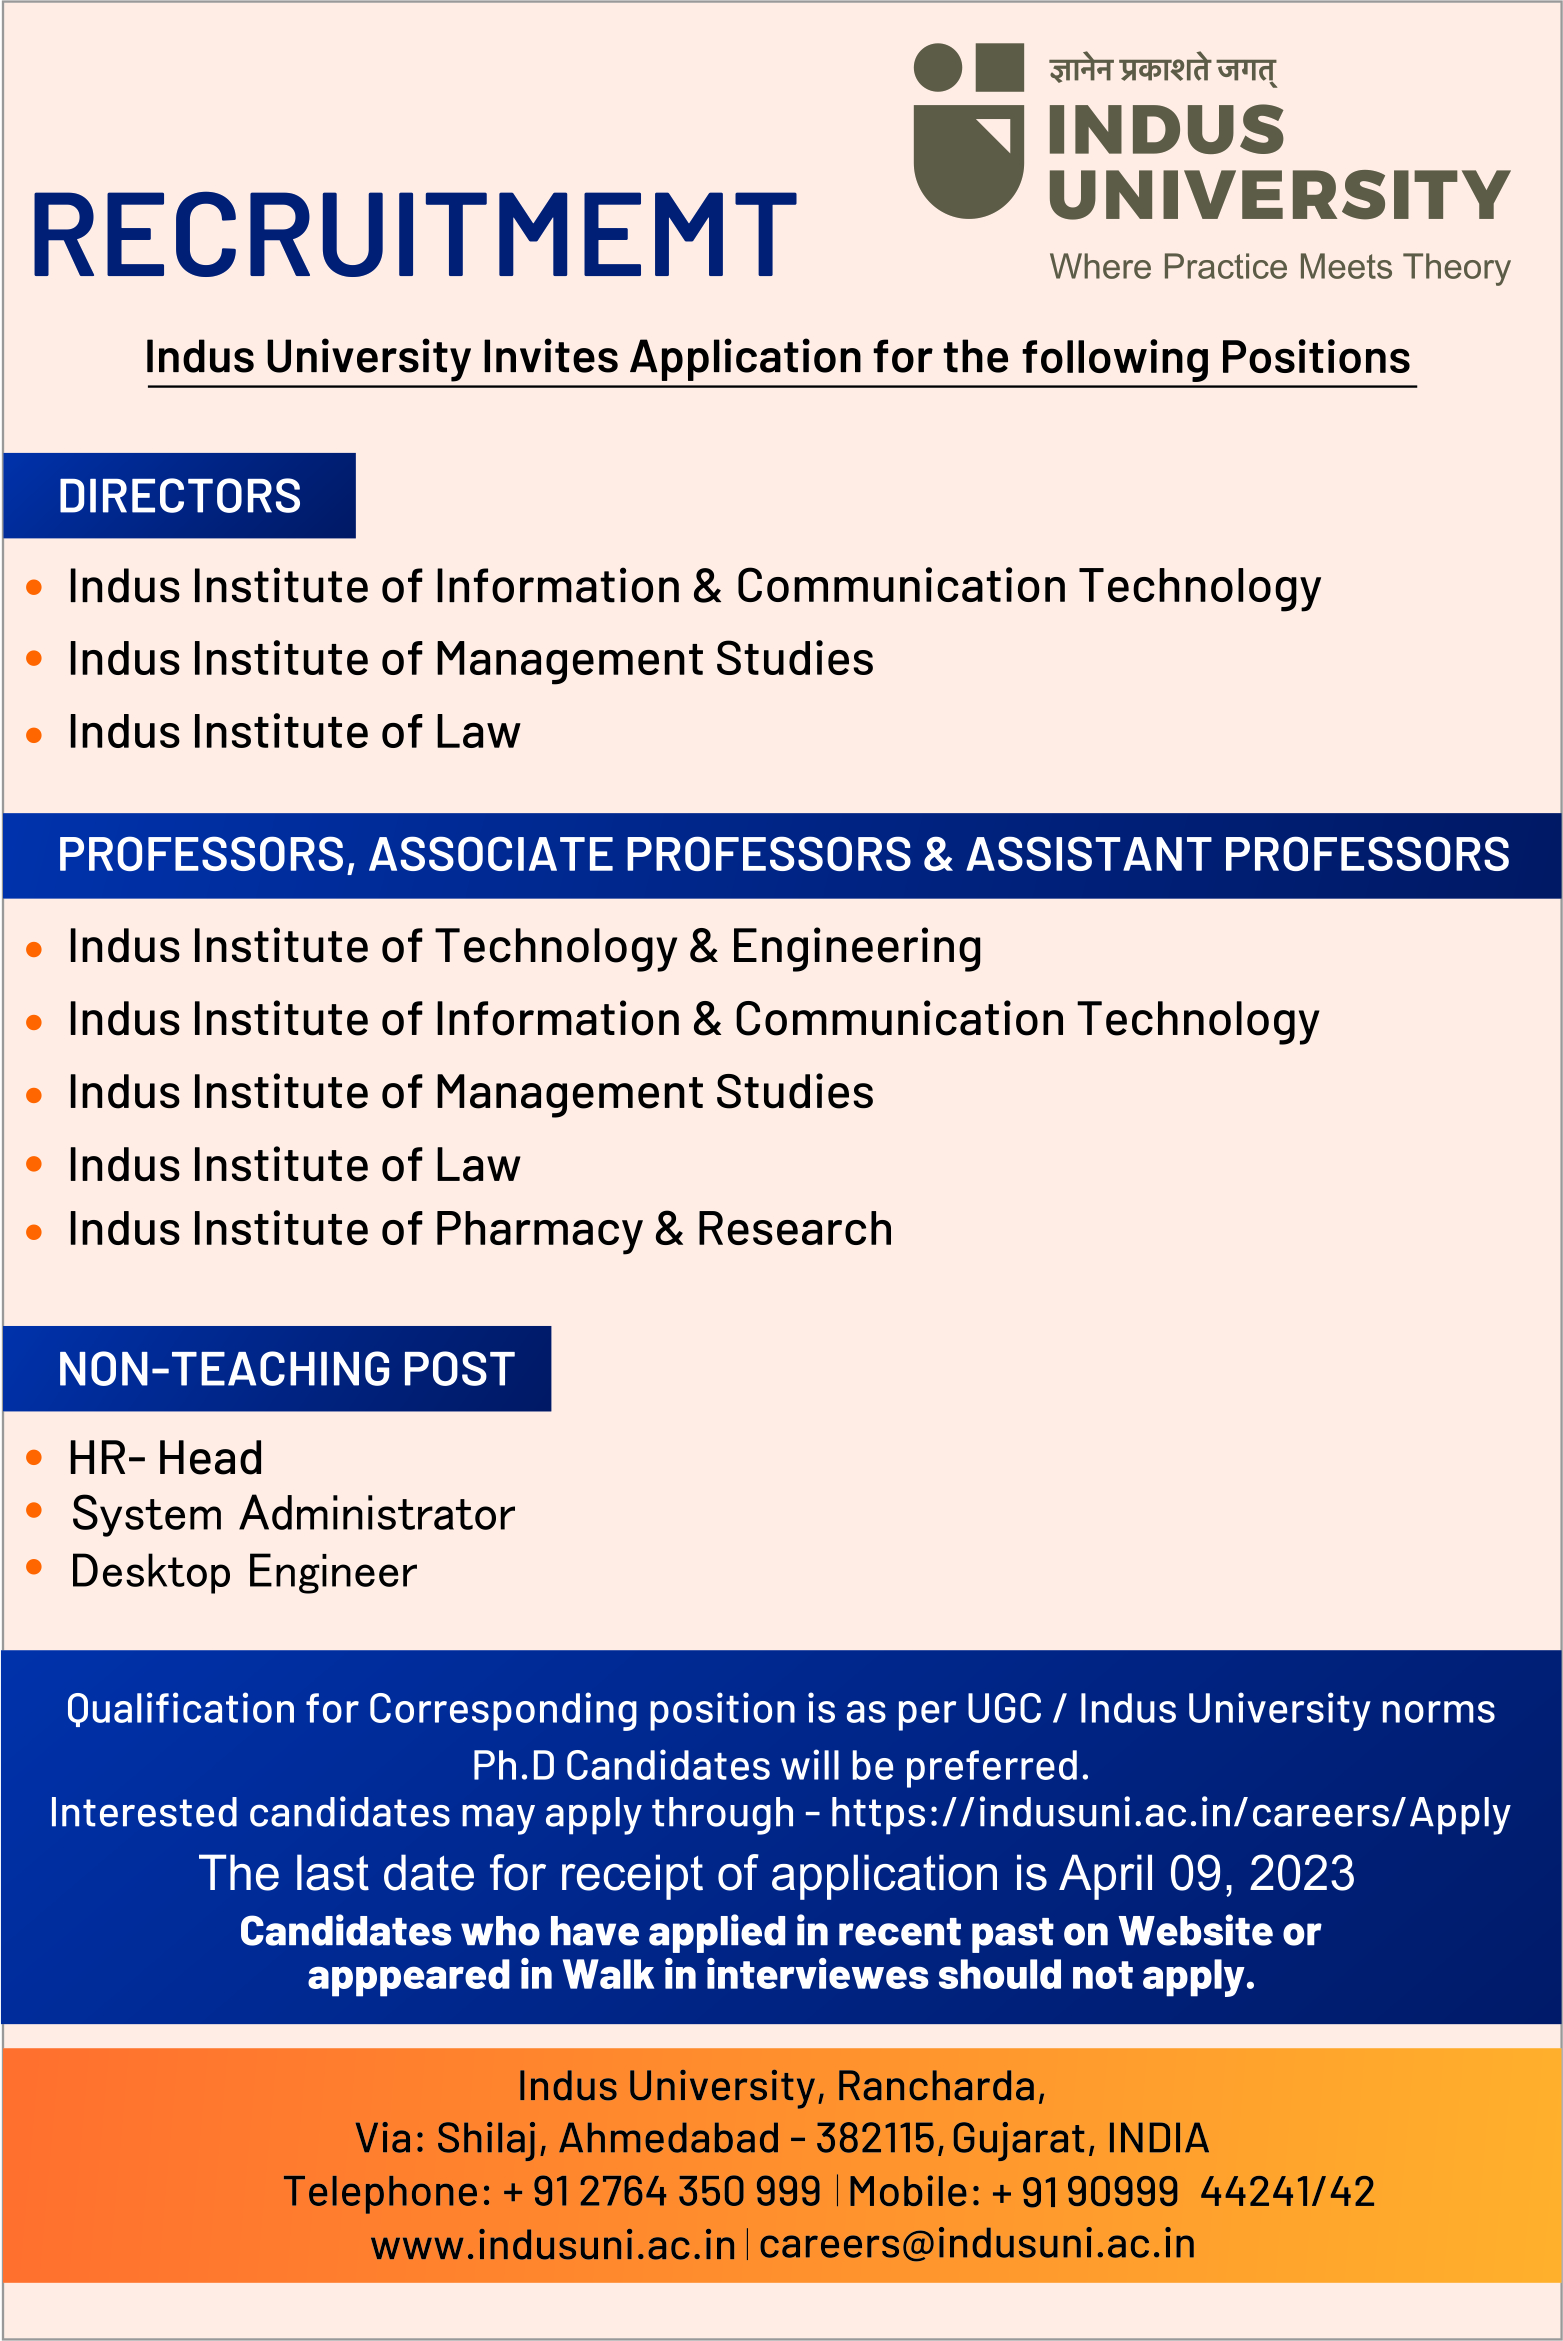 Engineering Courses and Eligibility